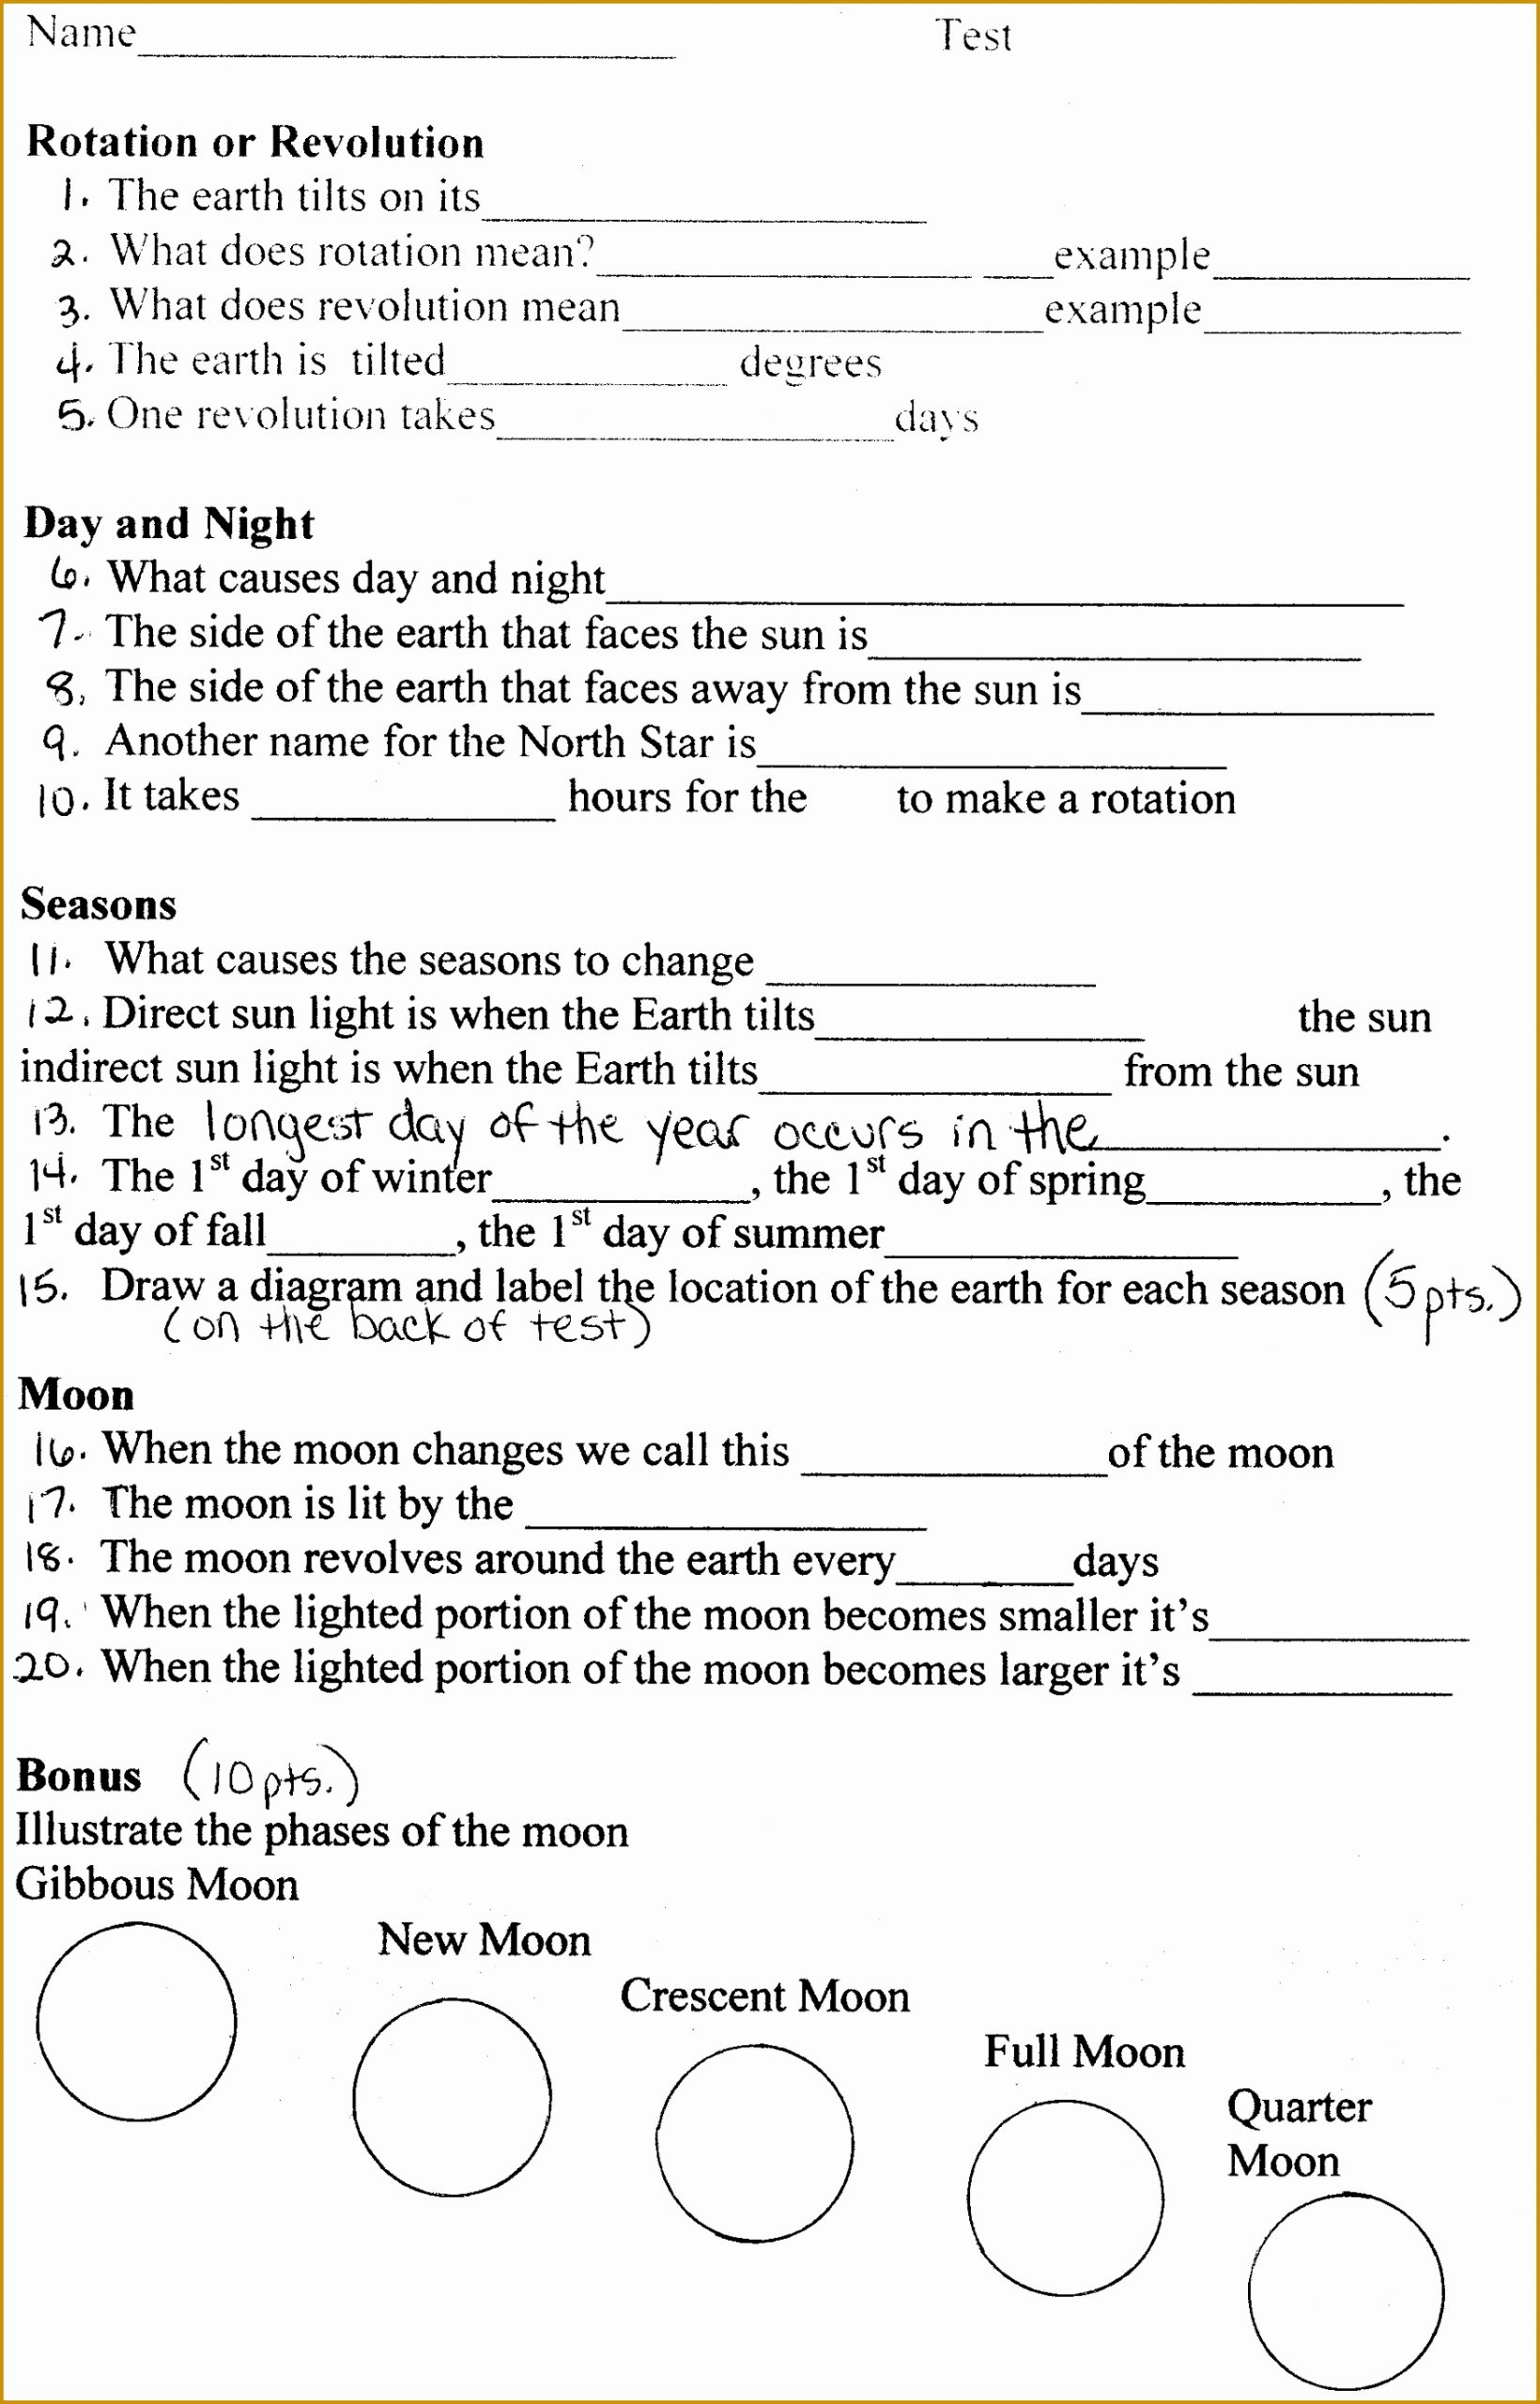 Middle School Science Worksheets Pdf Awesome 3 Latitude and Longitude Worksheets